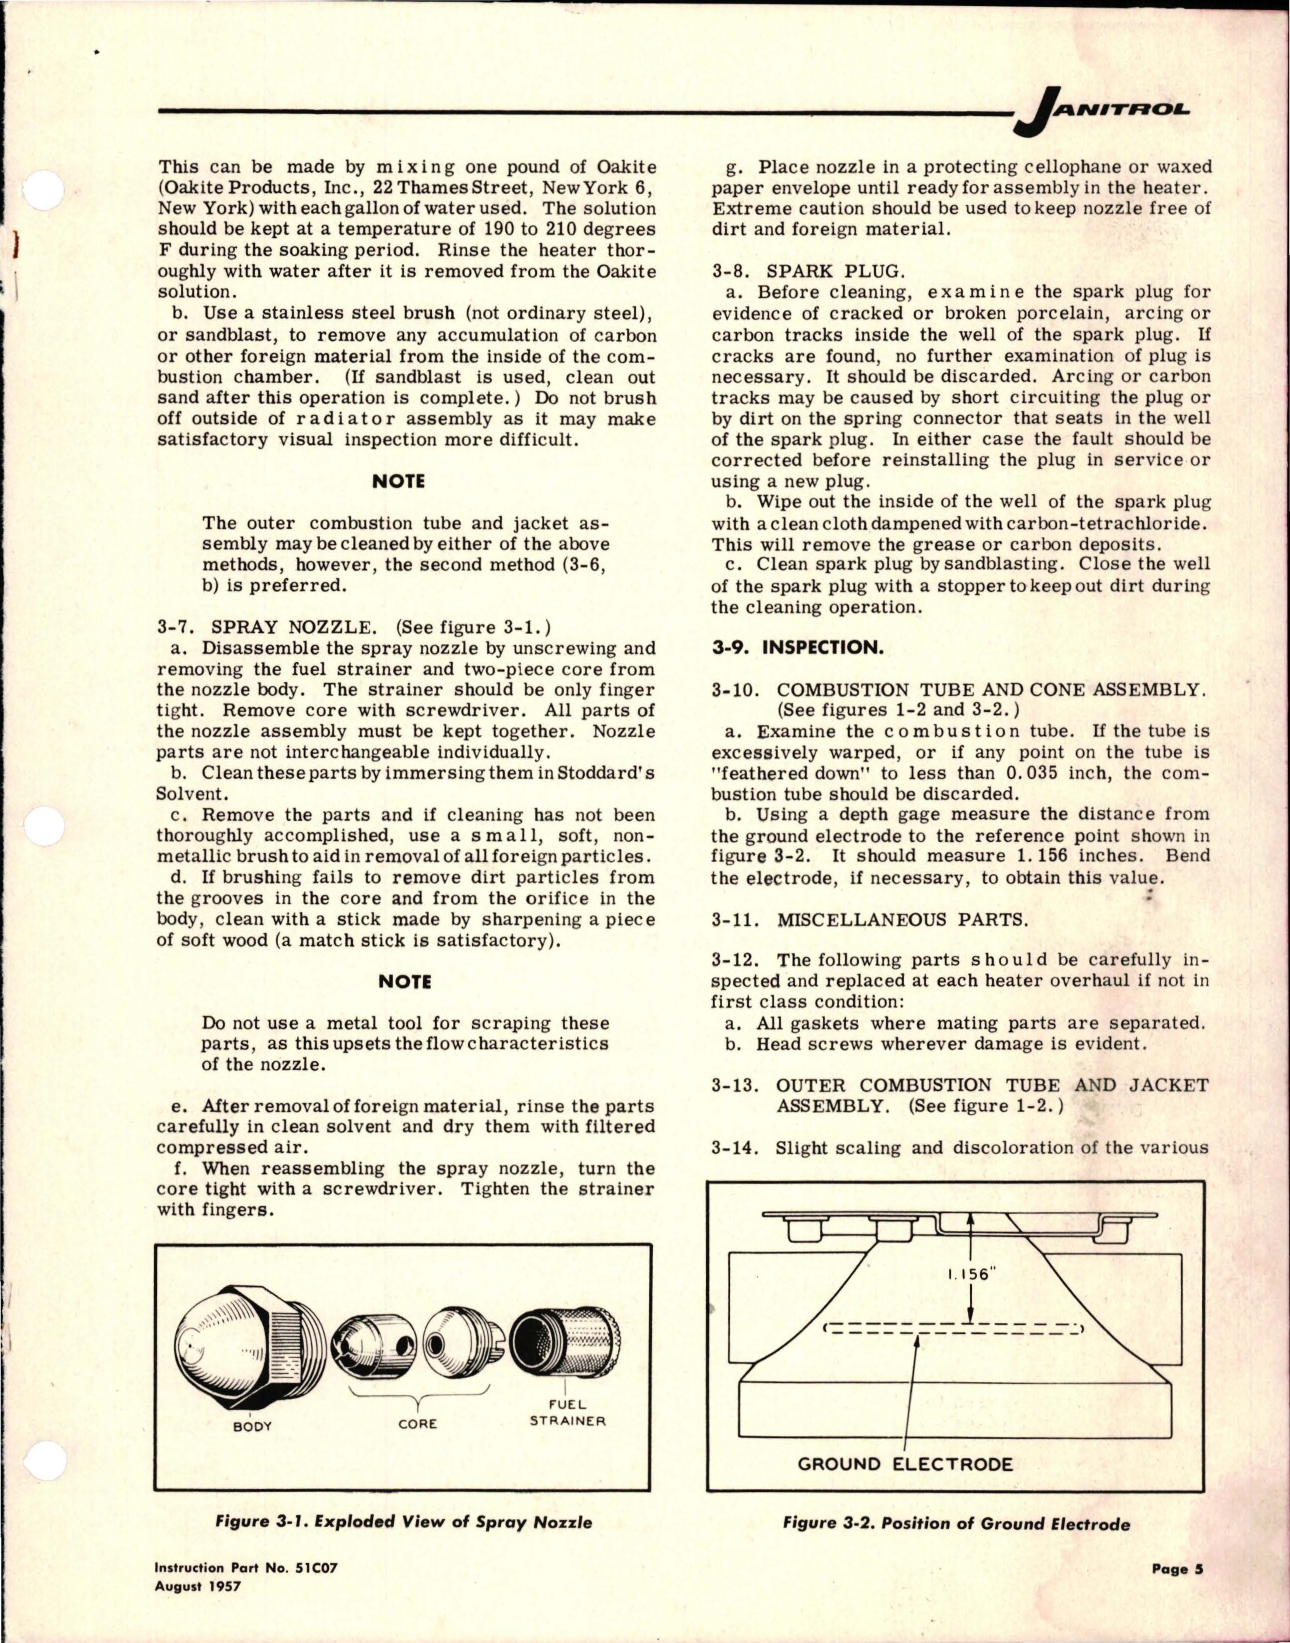 Sample page 5 from AirCorps Library document: Maintenance Instructions for Aircraft Heaters - S-200 Series - Parts 49C65, A49C65, and B49C65 